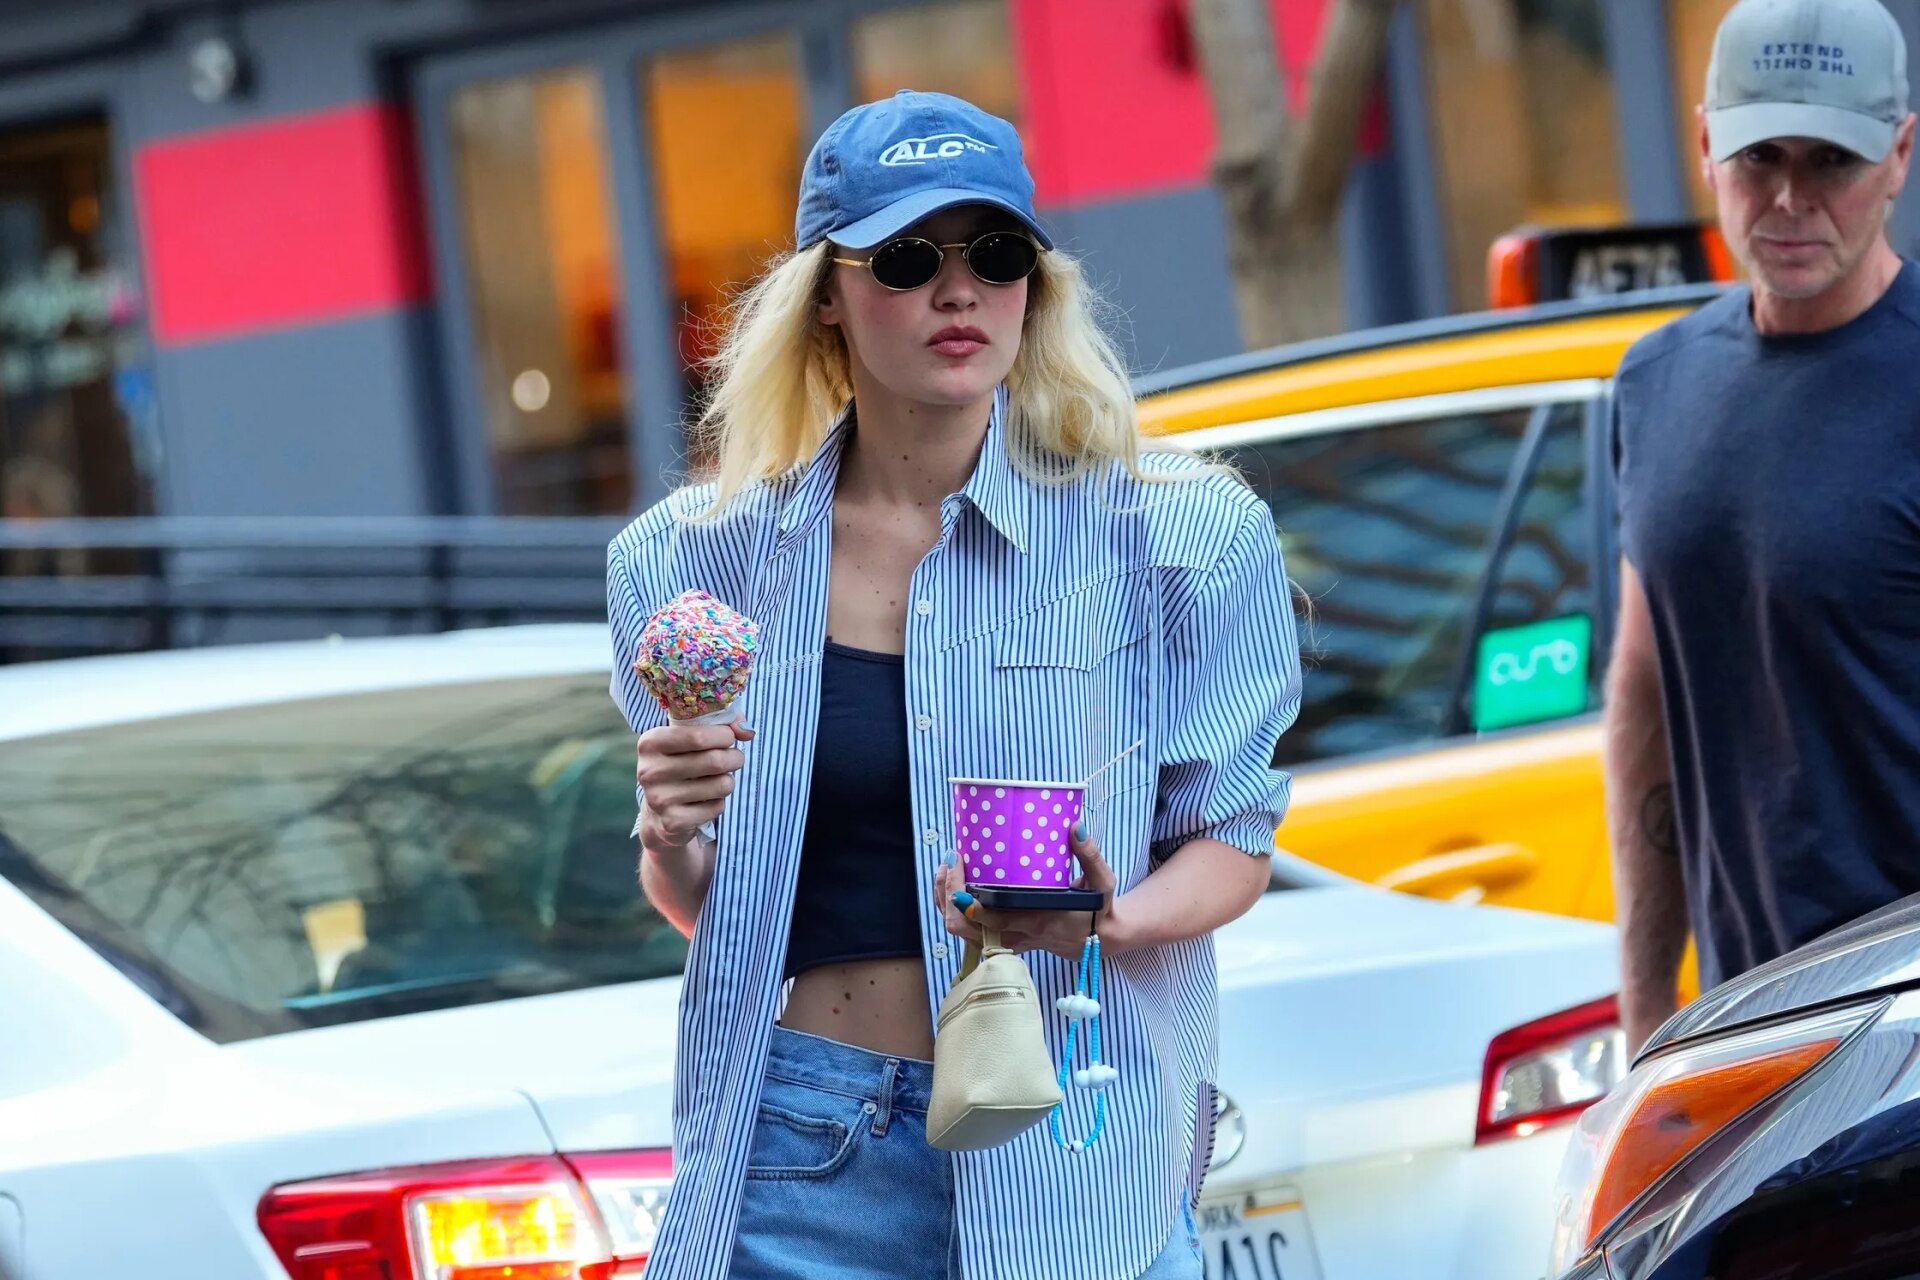 Gigi Hadid's Favourite Mini Bag Is The Ultimate In Stealth Wealth Dressing